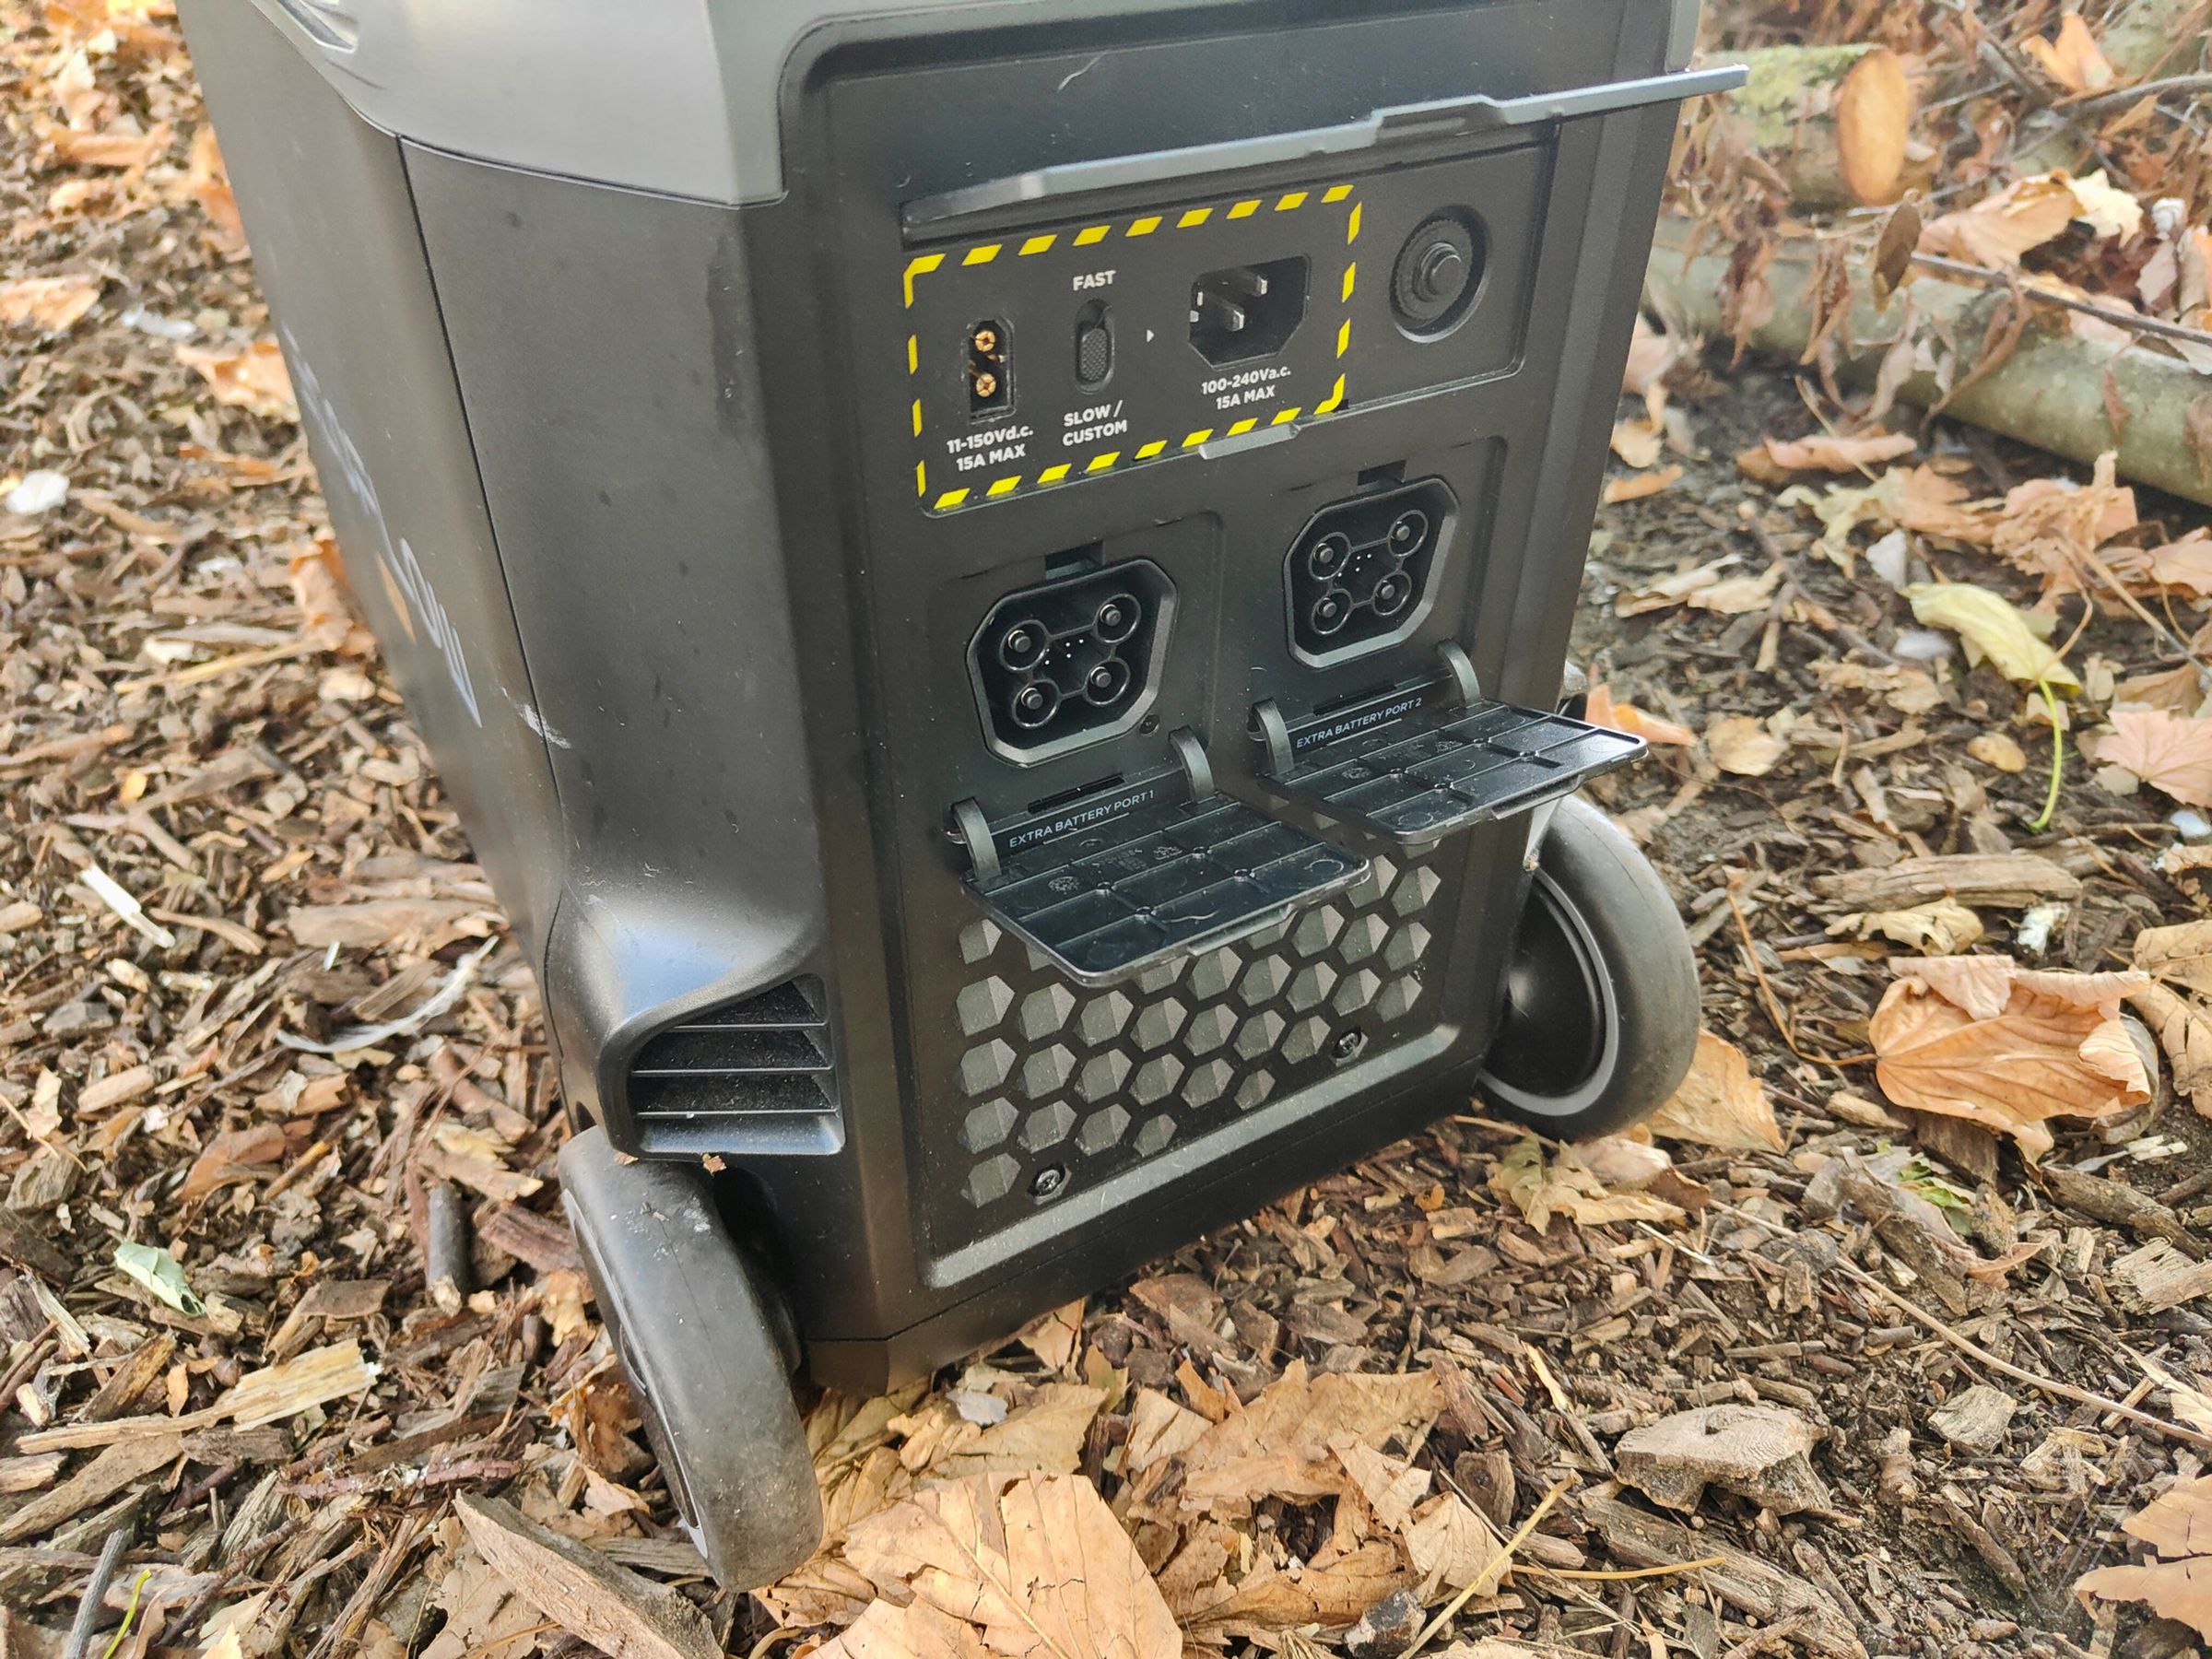 <em>Two expansion ports on the back let you connect additional EcoFlow batteries for more output power and capacity.</em>